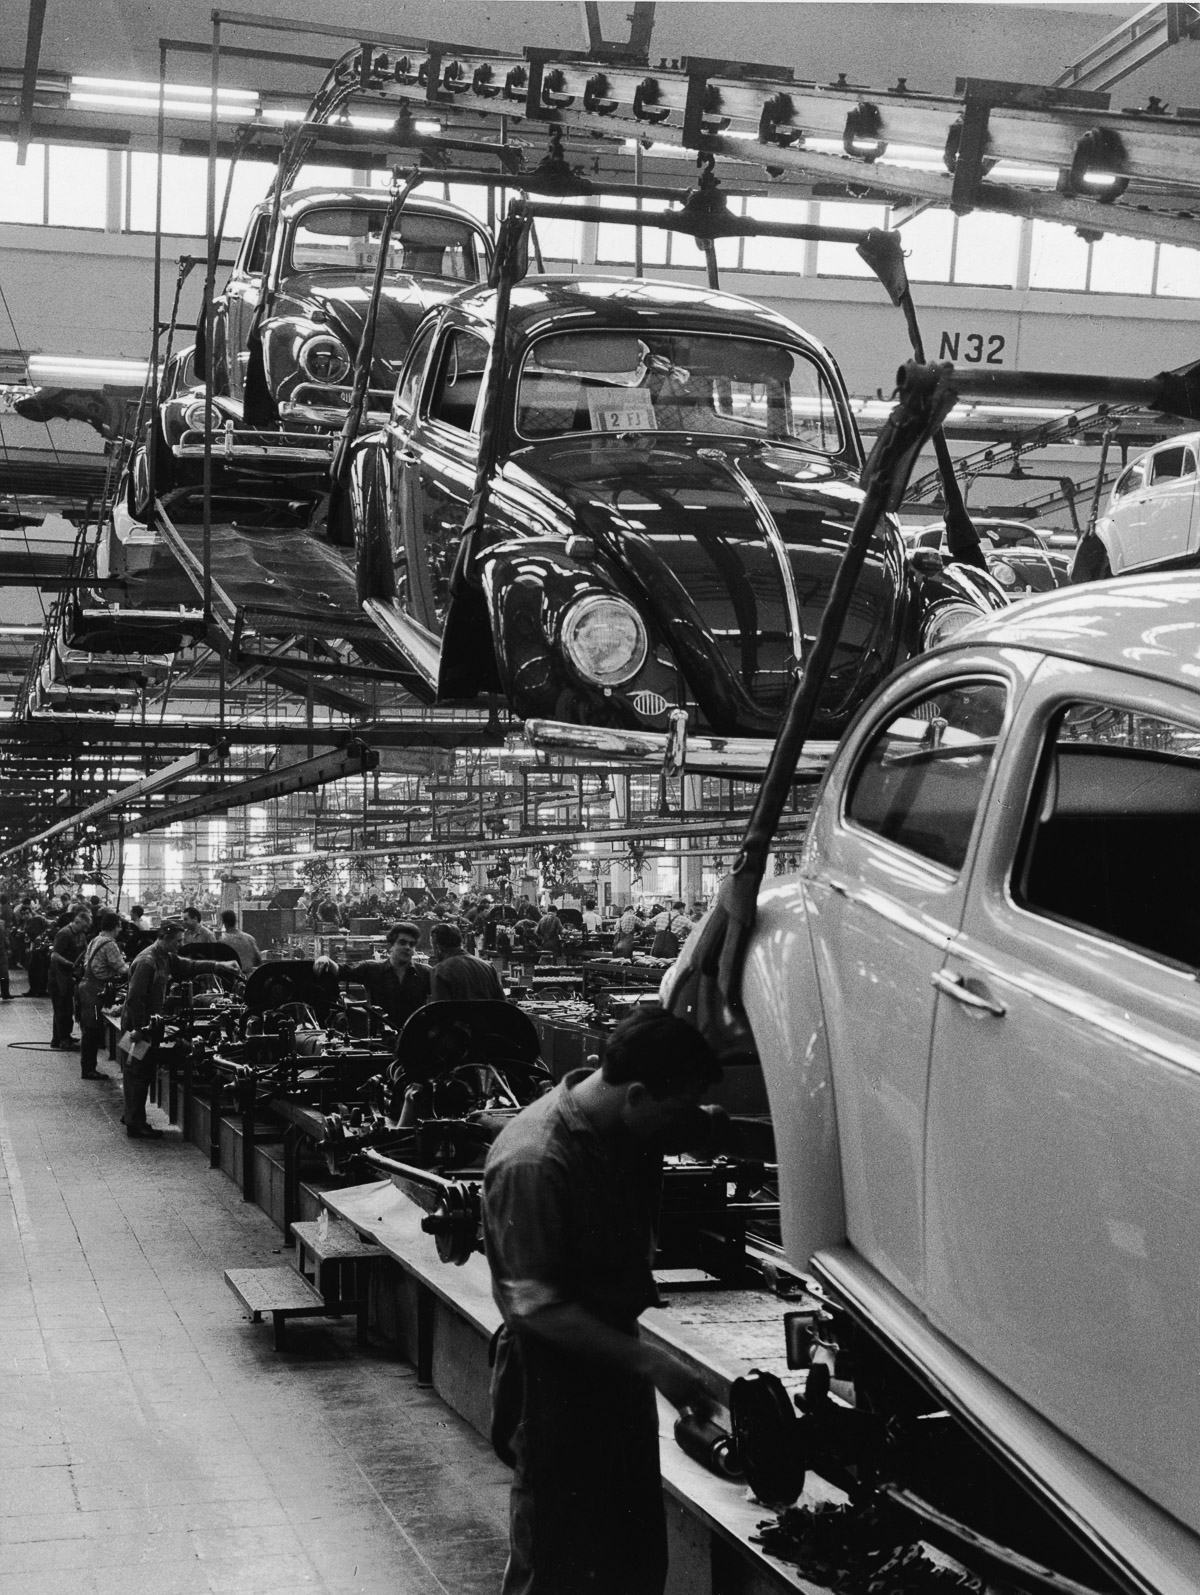 Employees at a Volkswagen plant work on an assembly line to complete Volkswagen 1200 Sedans, better known as Beetles, Wolfsburg, Germany, 1960s. In the foreground, a man guides a car's body as it is lowered onto the chassis. (Photo by Pictorial Parade/Getty Images)